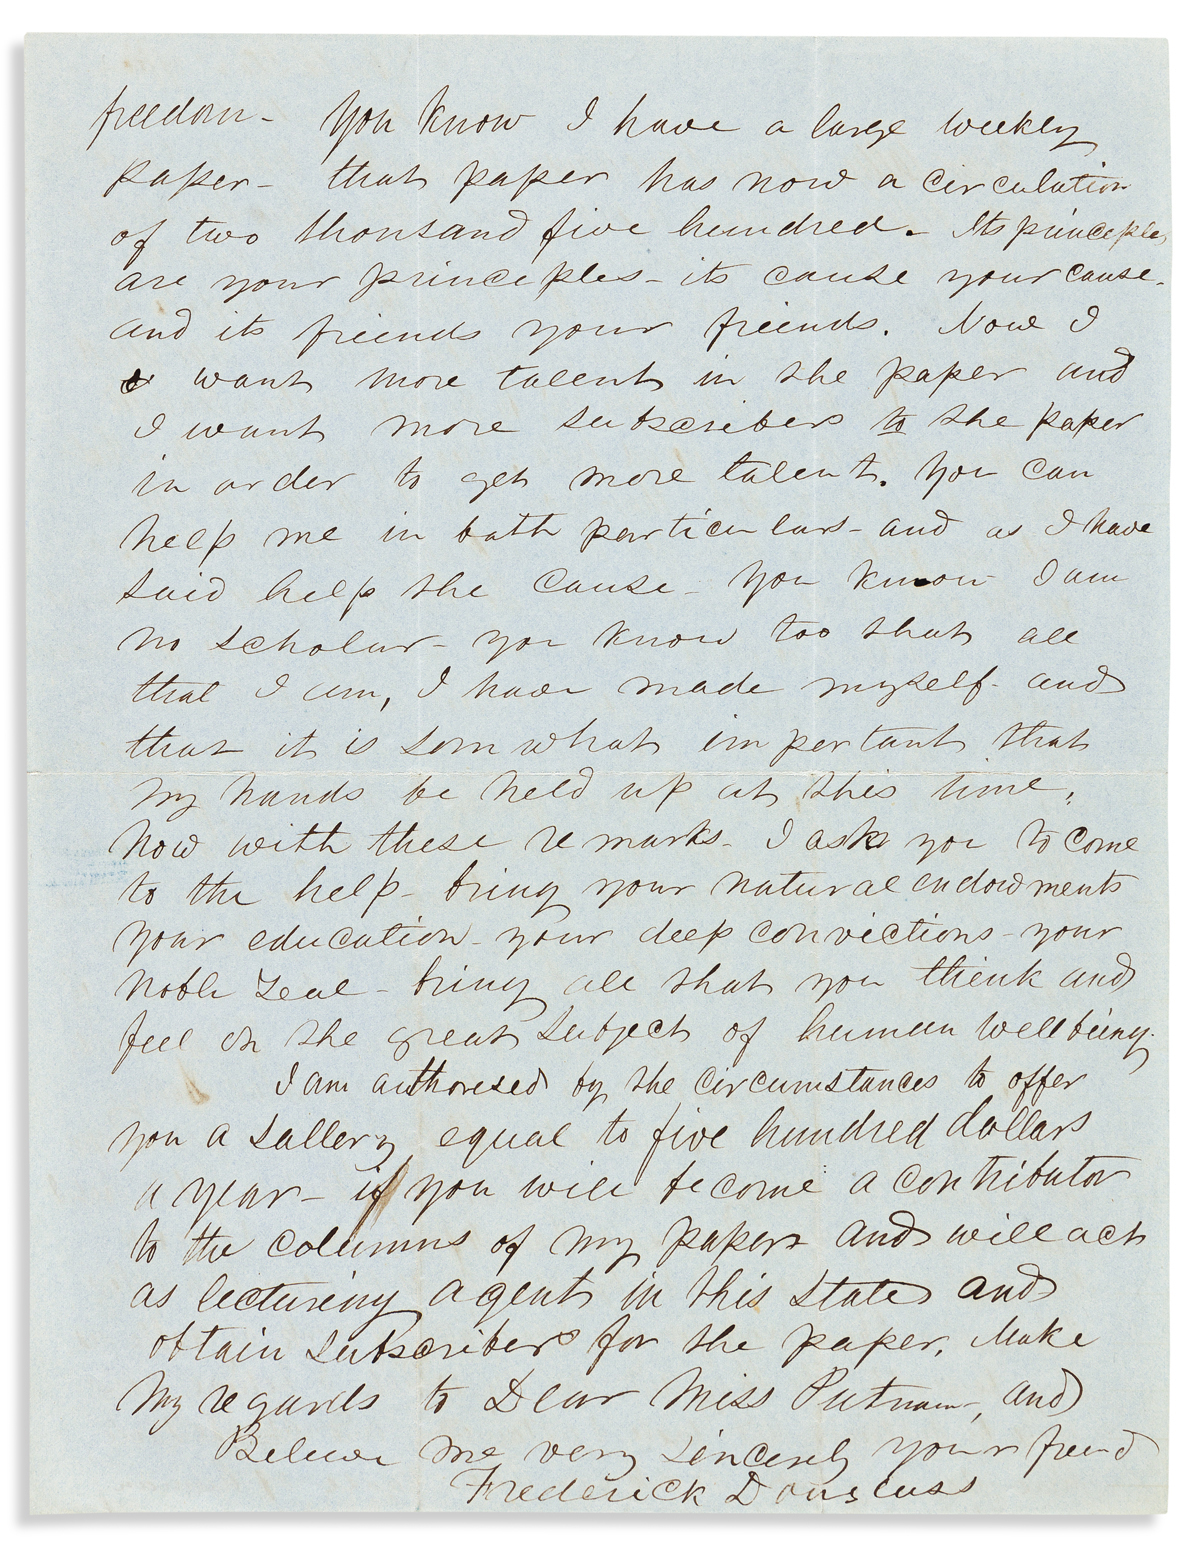 DOUGLASS, FREDERICK. Autograph Letter Signed, to Sallie Holley (Dear Sally),